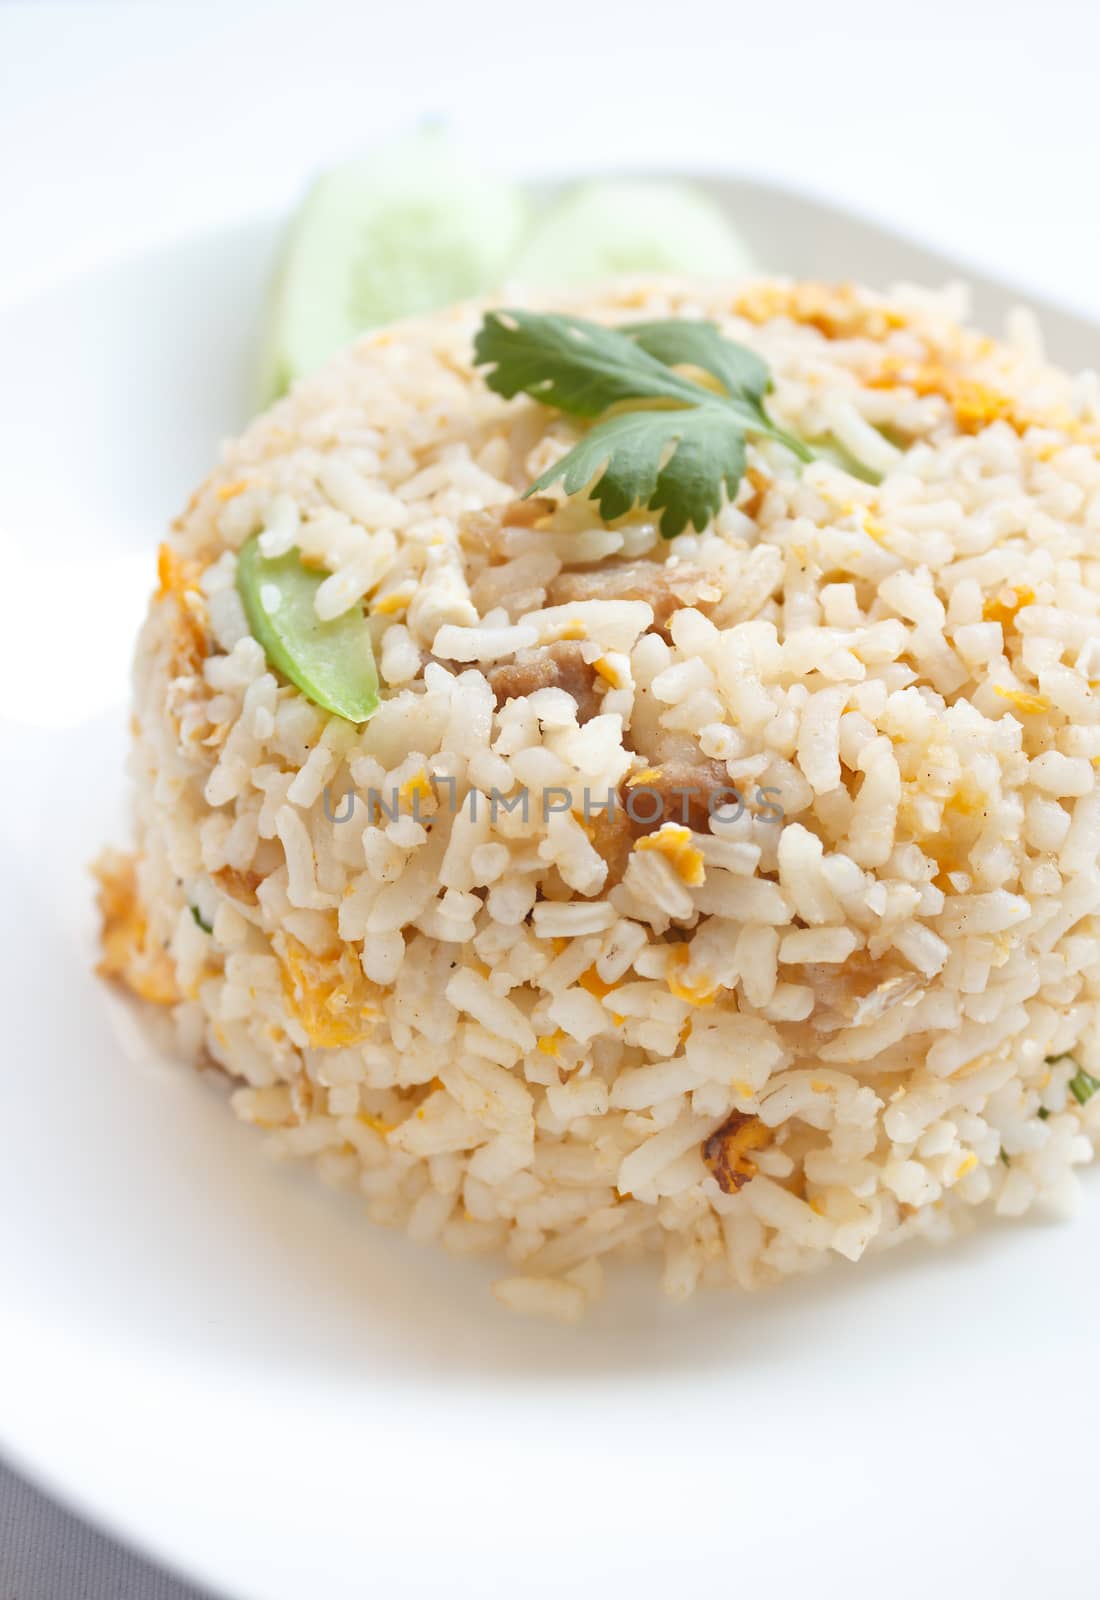 fried rice with pork by vitawin